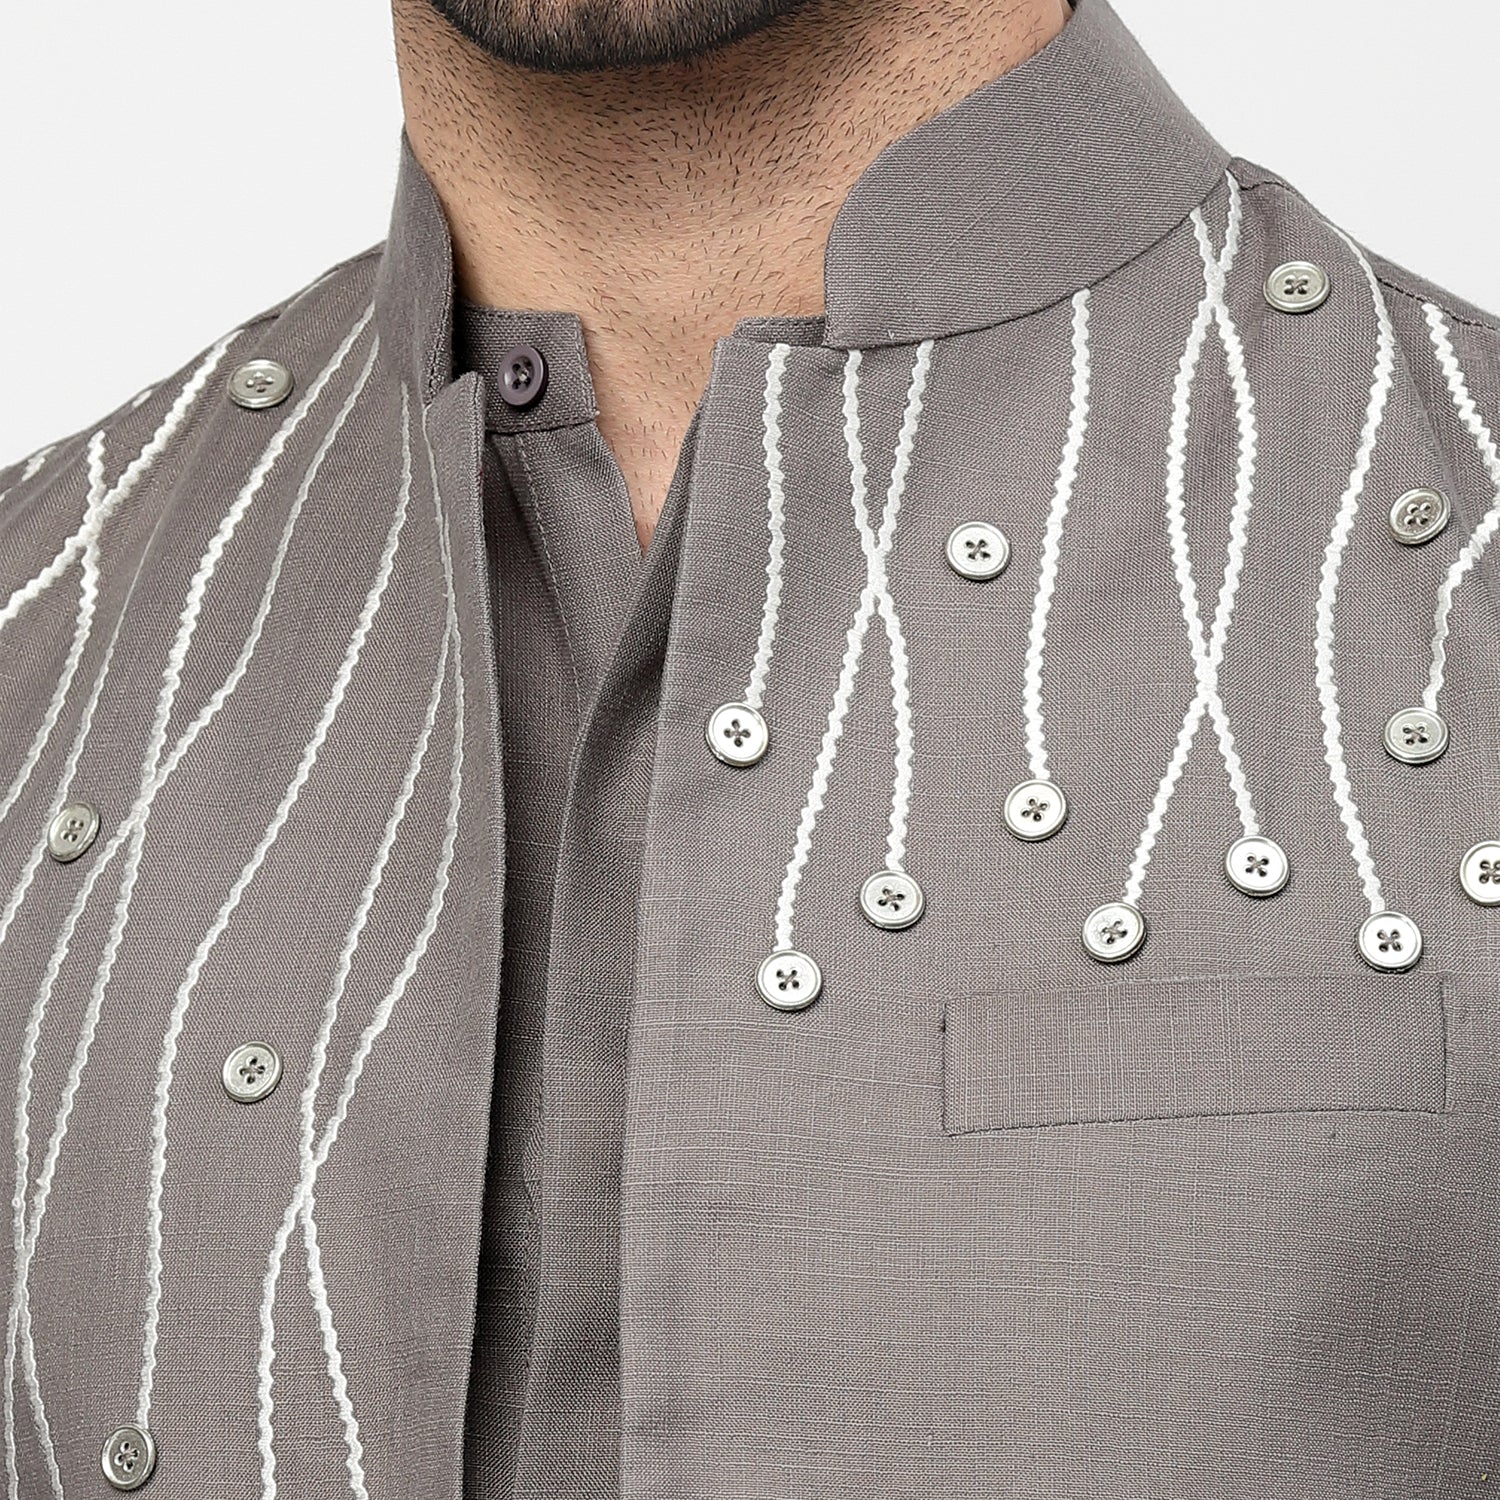 Linen Jacket With Buttons